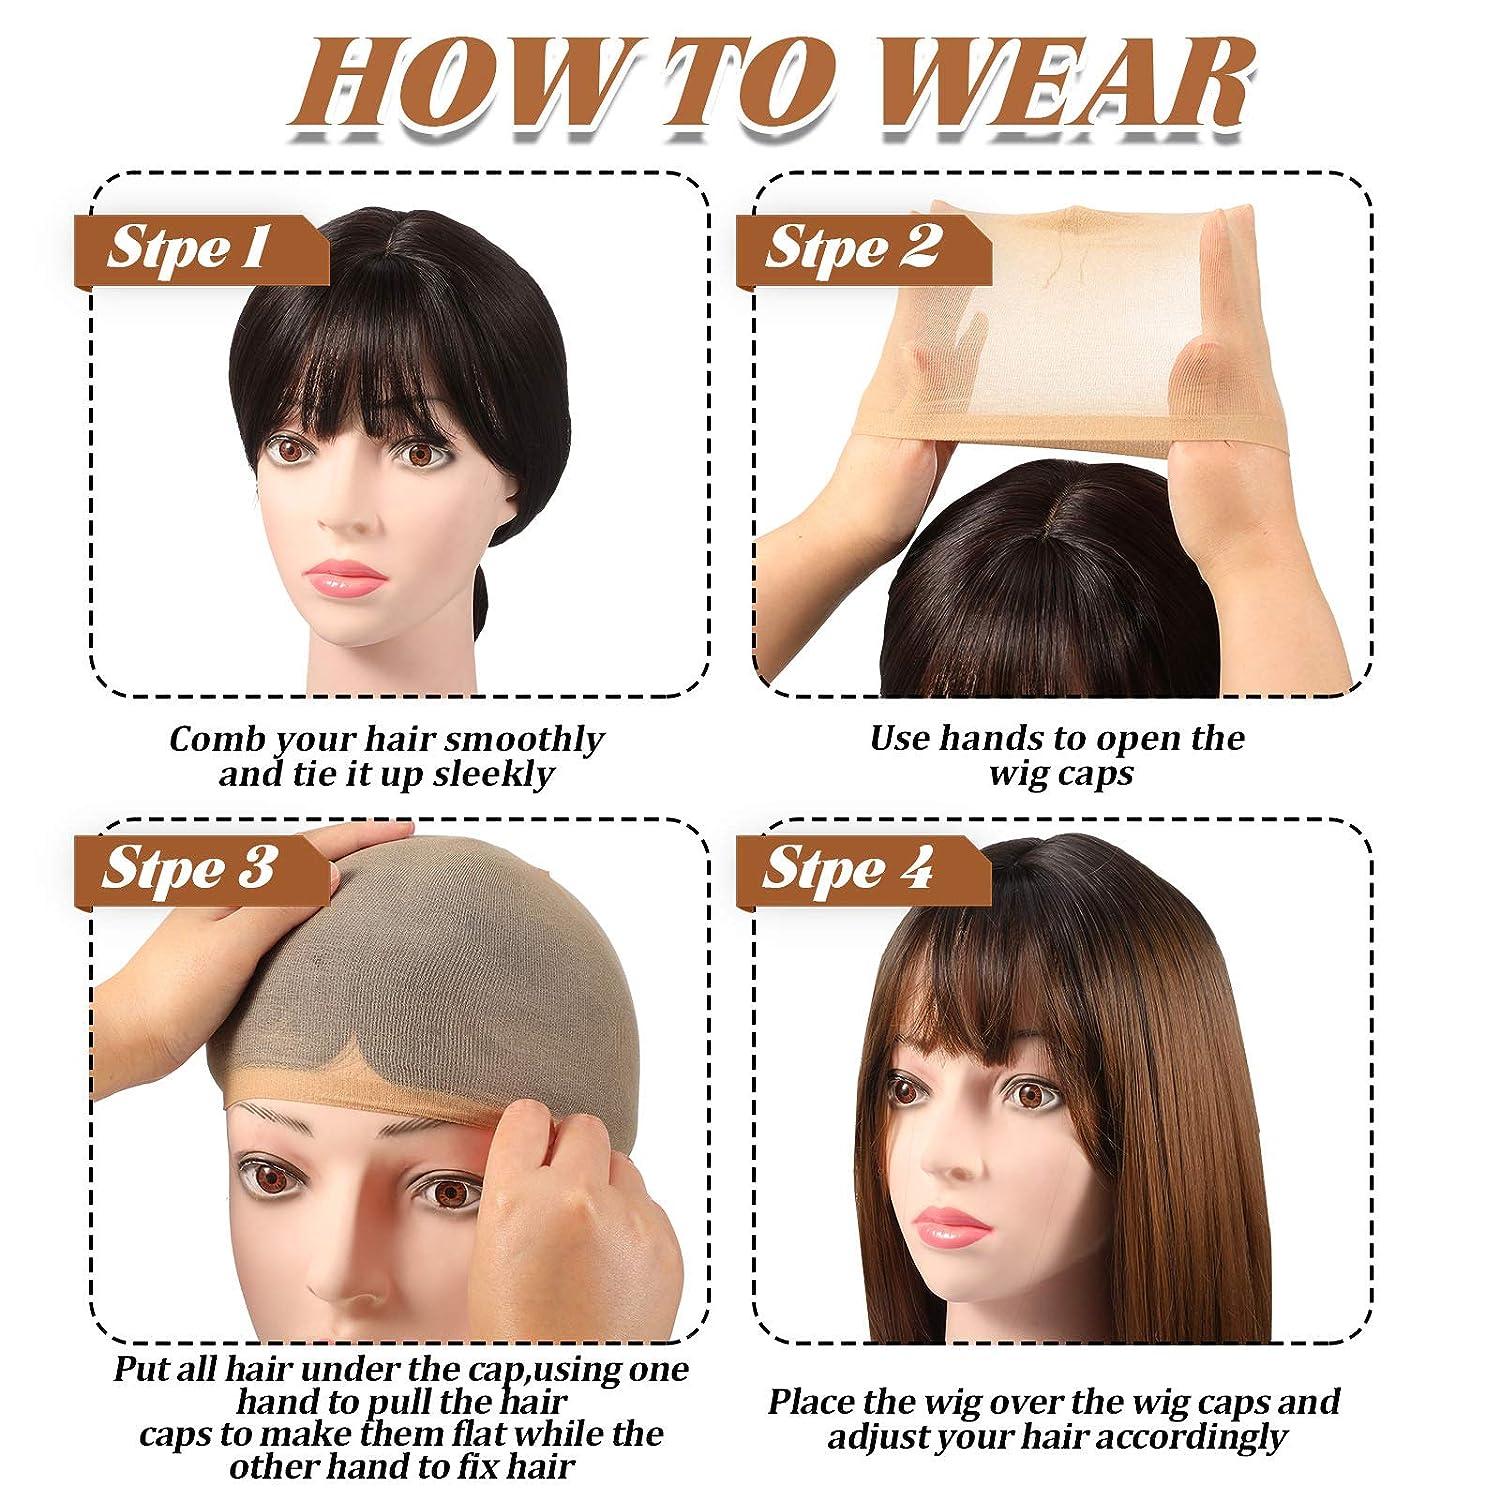 Do You Need a Wig Cap To Wear a Wig? - StyleSeat